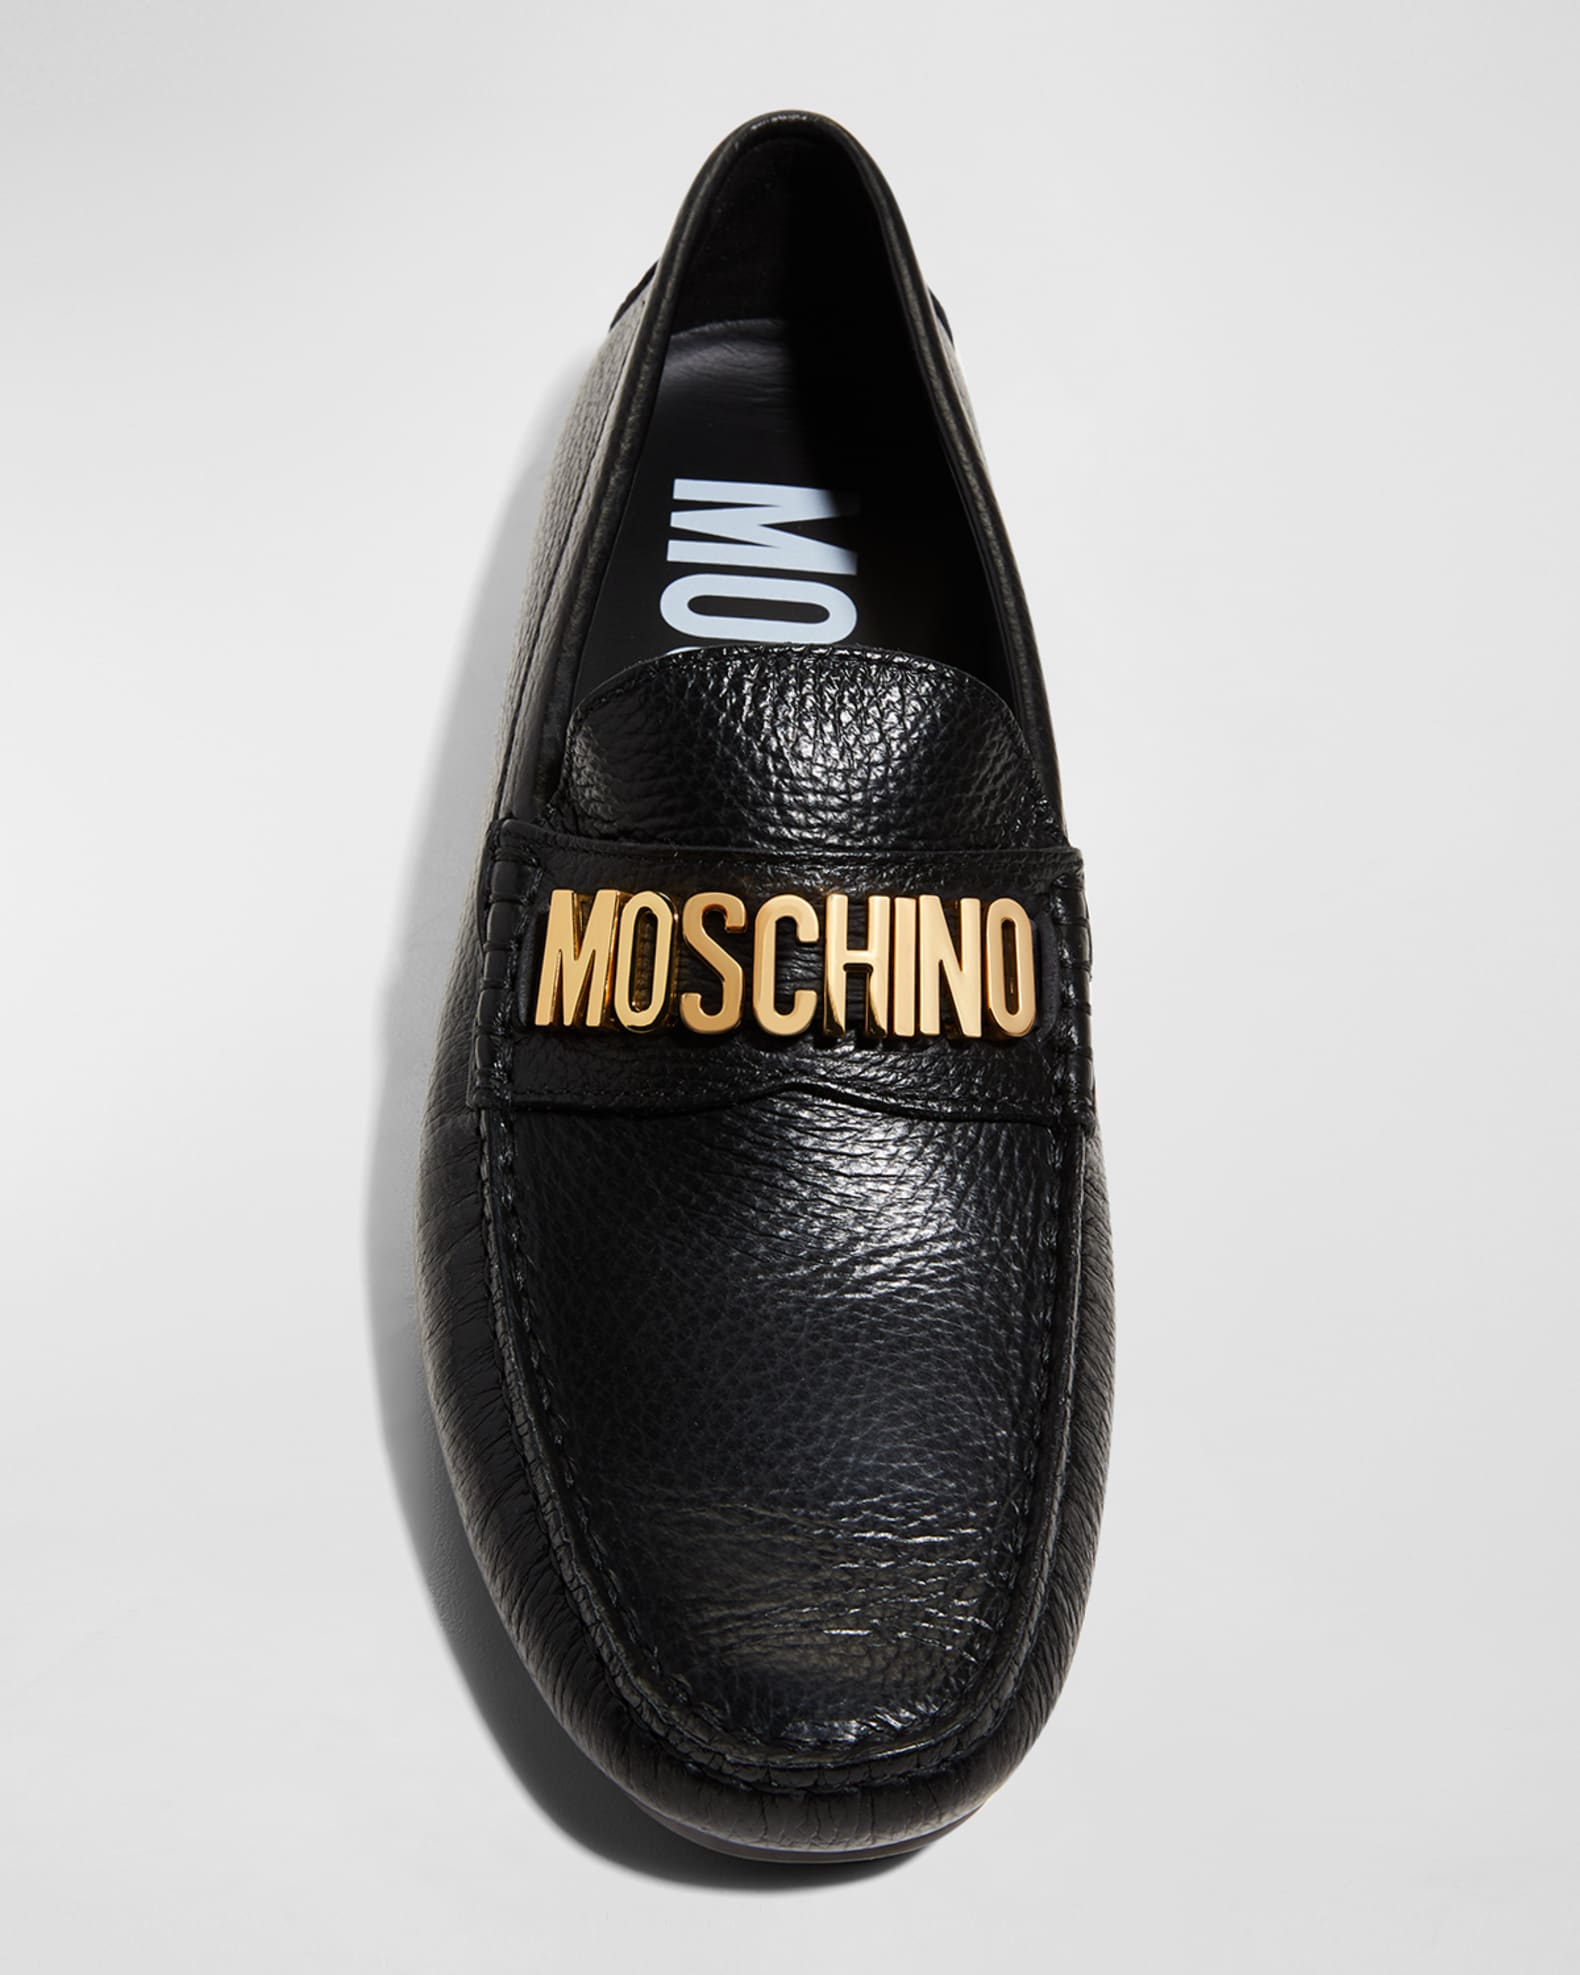 Moschino Men's Faux Leather Logo Driving Shoes | Neiman Marcus